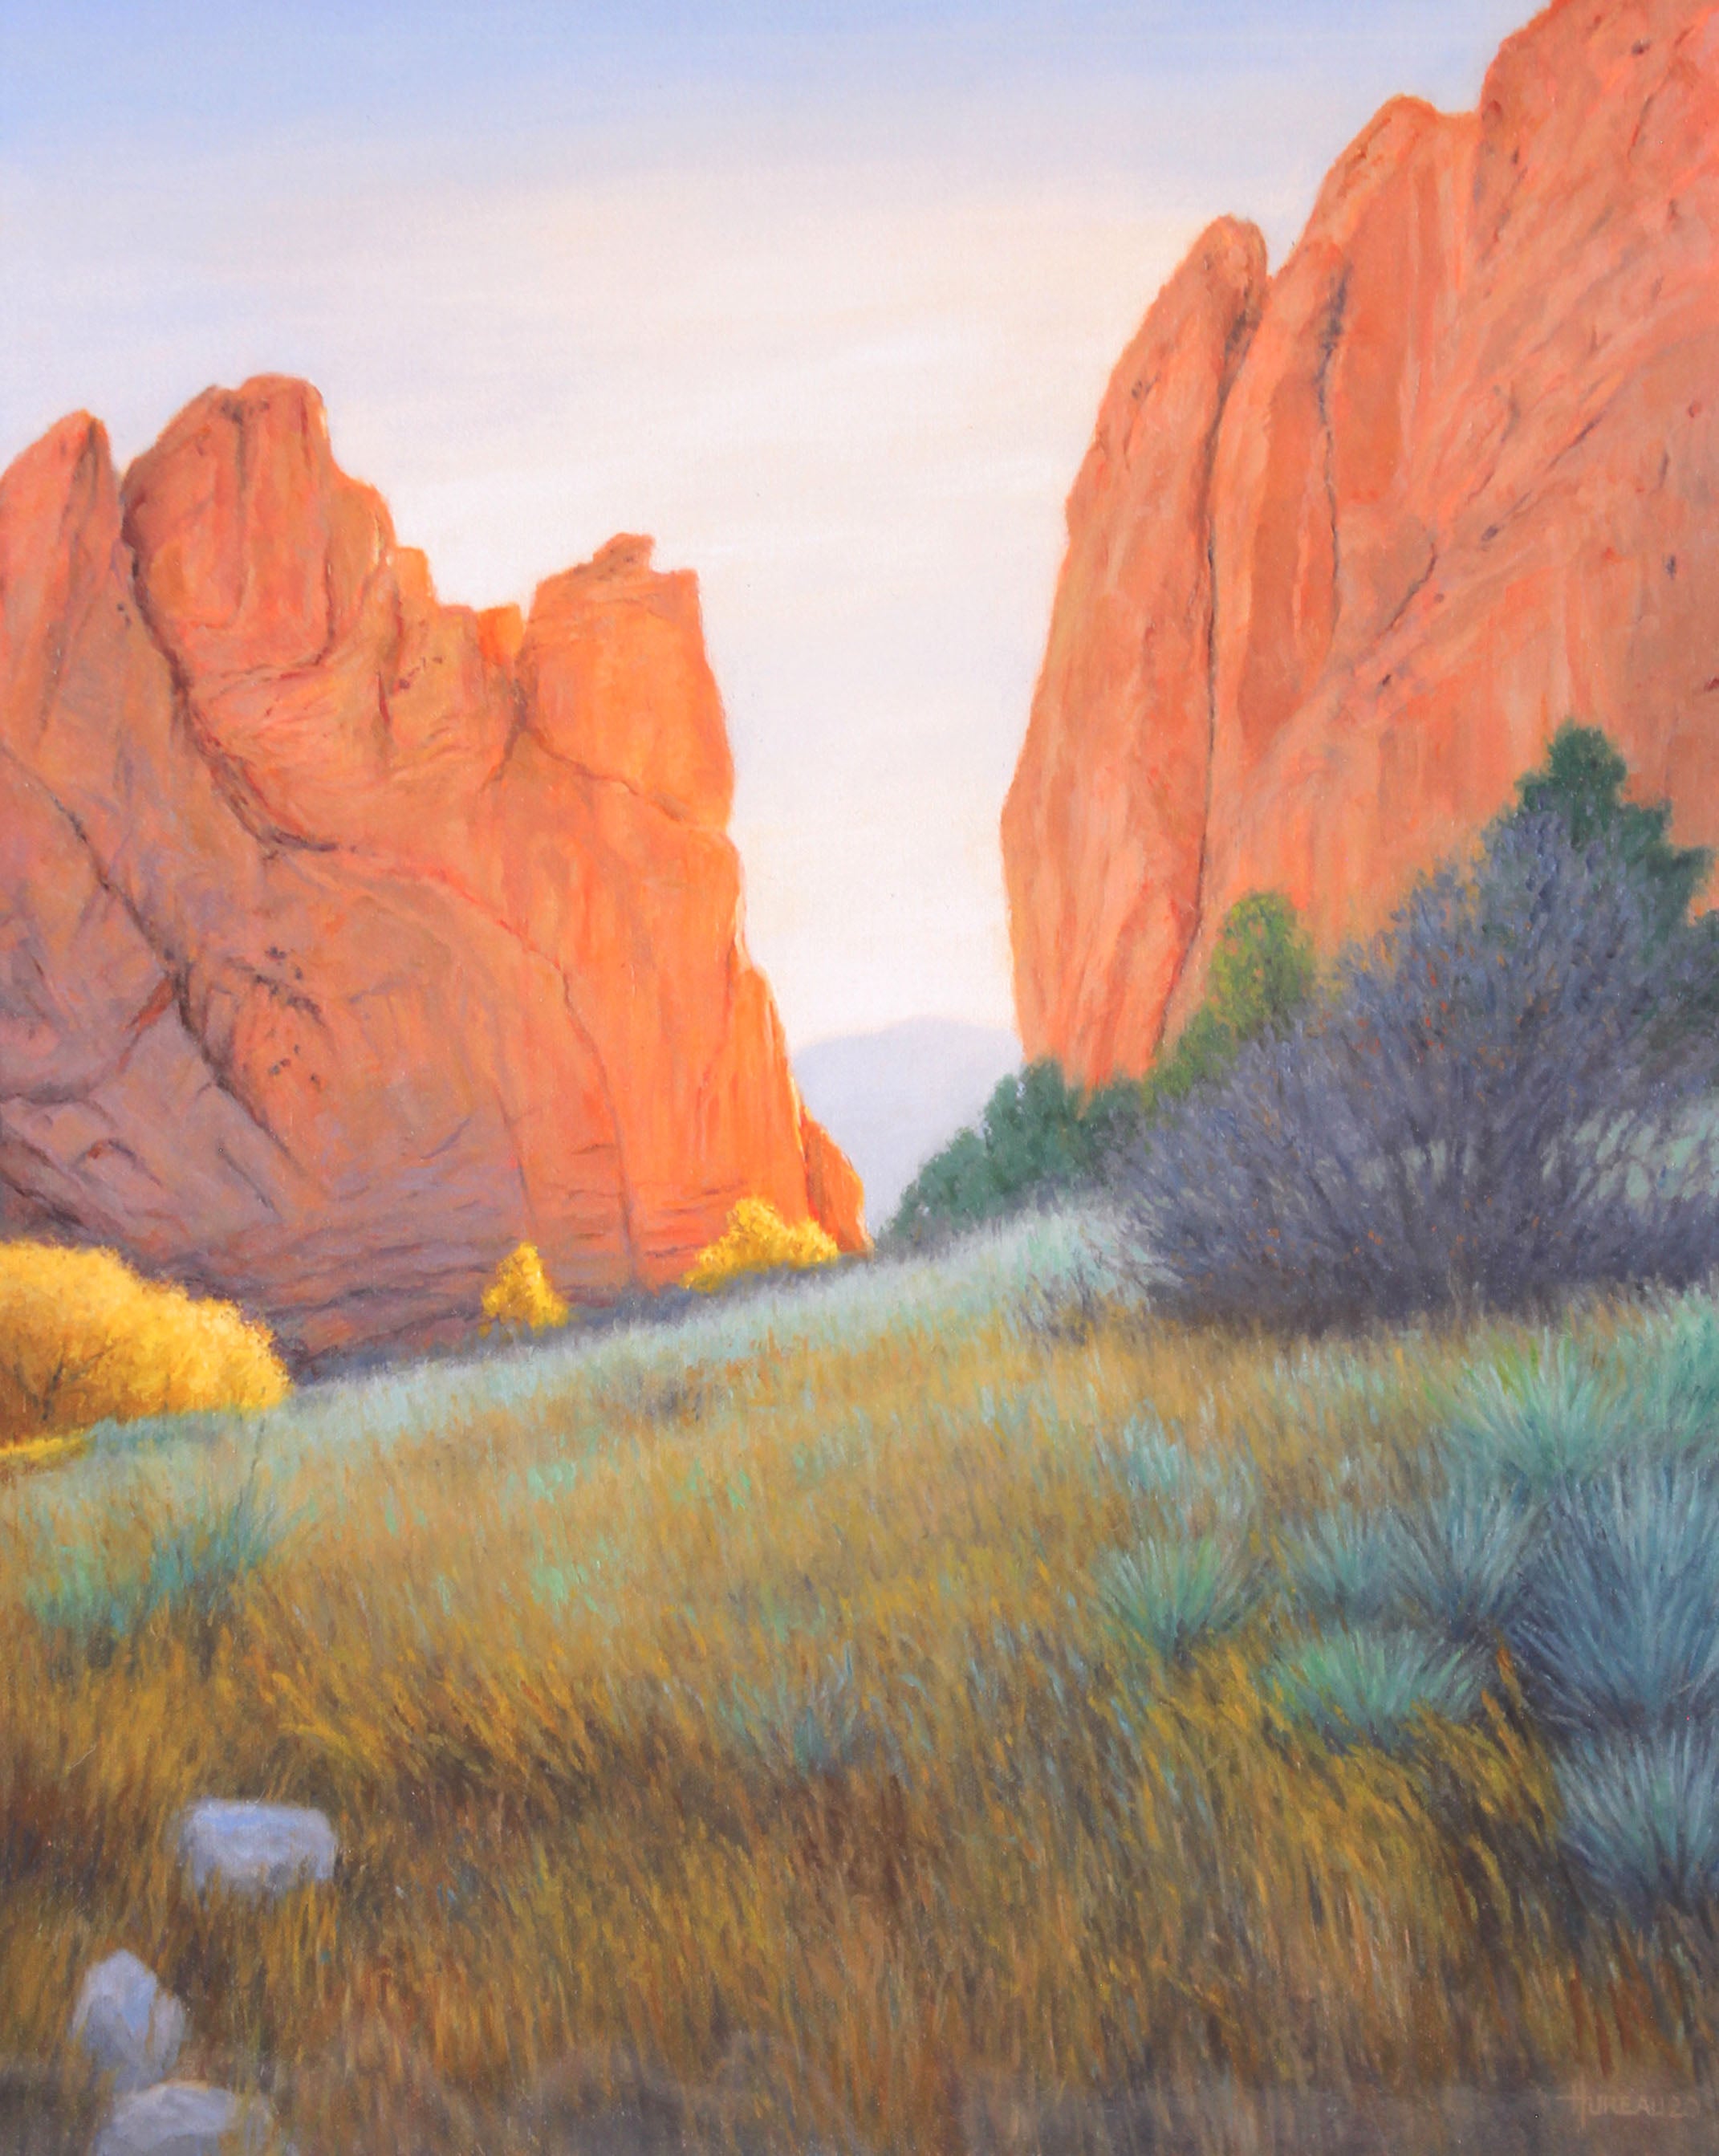 "Last Light at Garden of the Gods" Print by Christopher Hureau